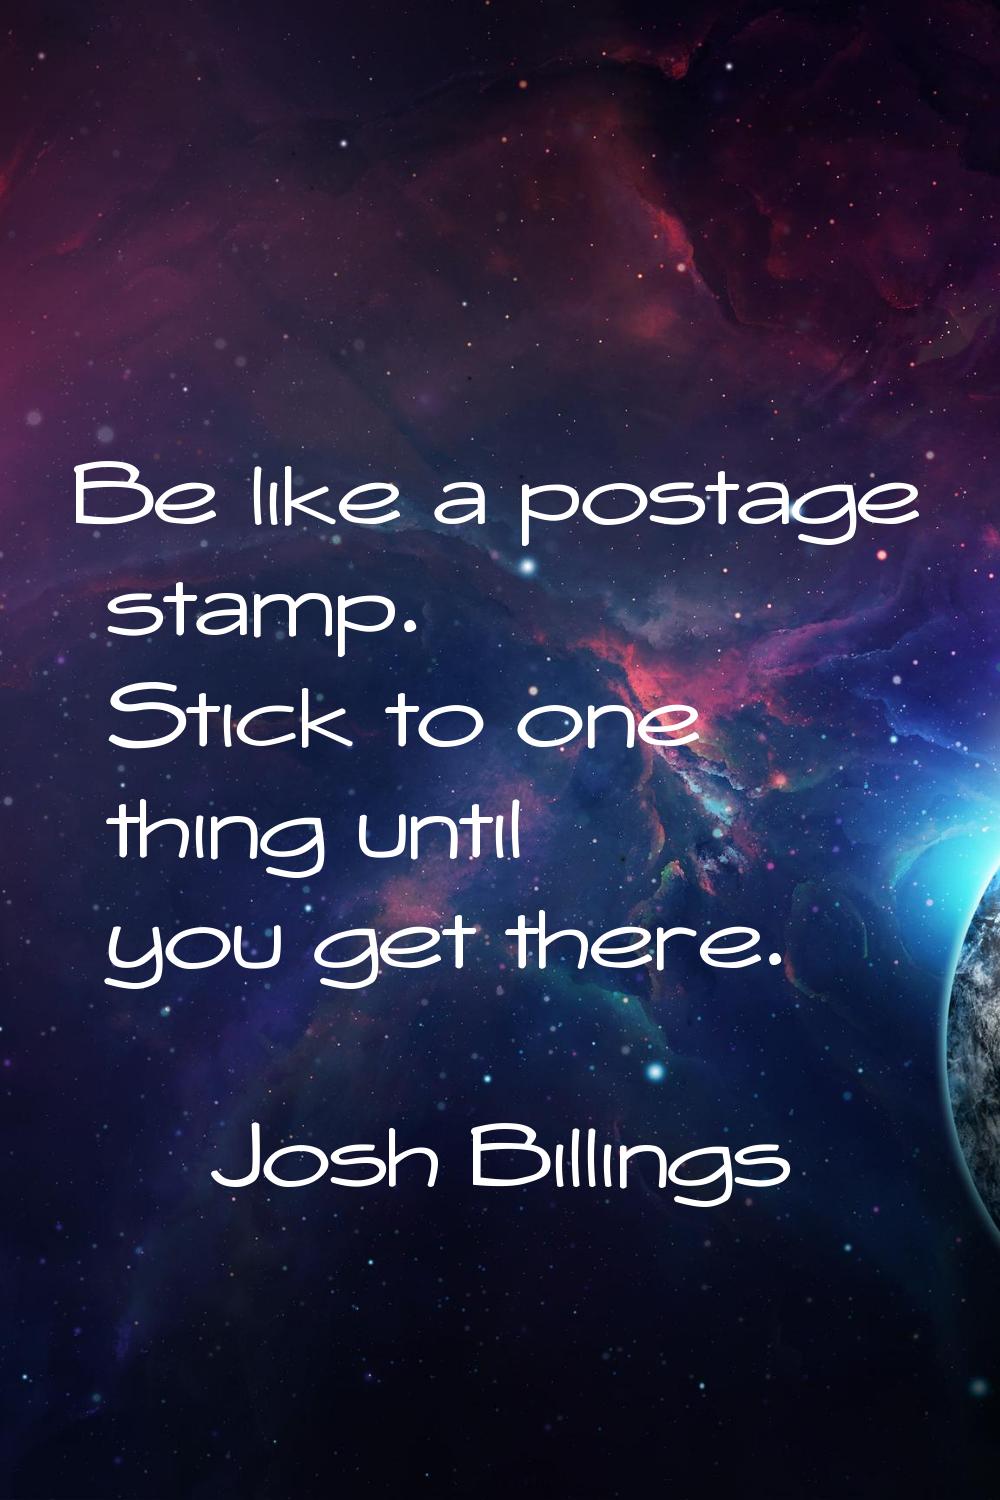 Be like a postage stamp. Stick to one thing until you get there.